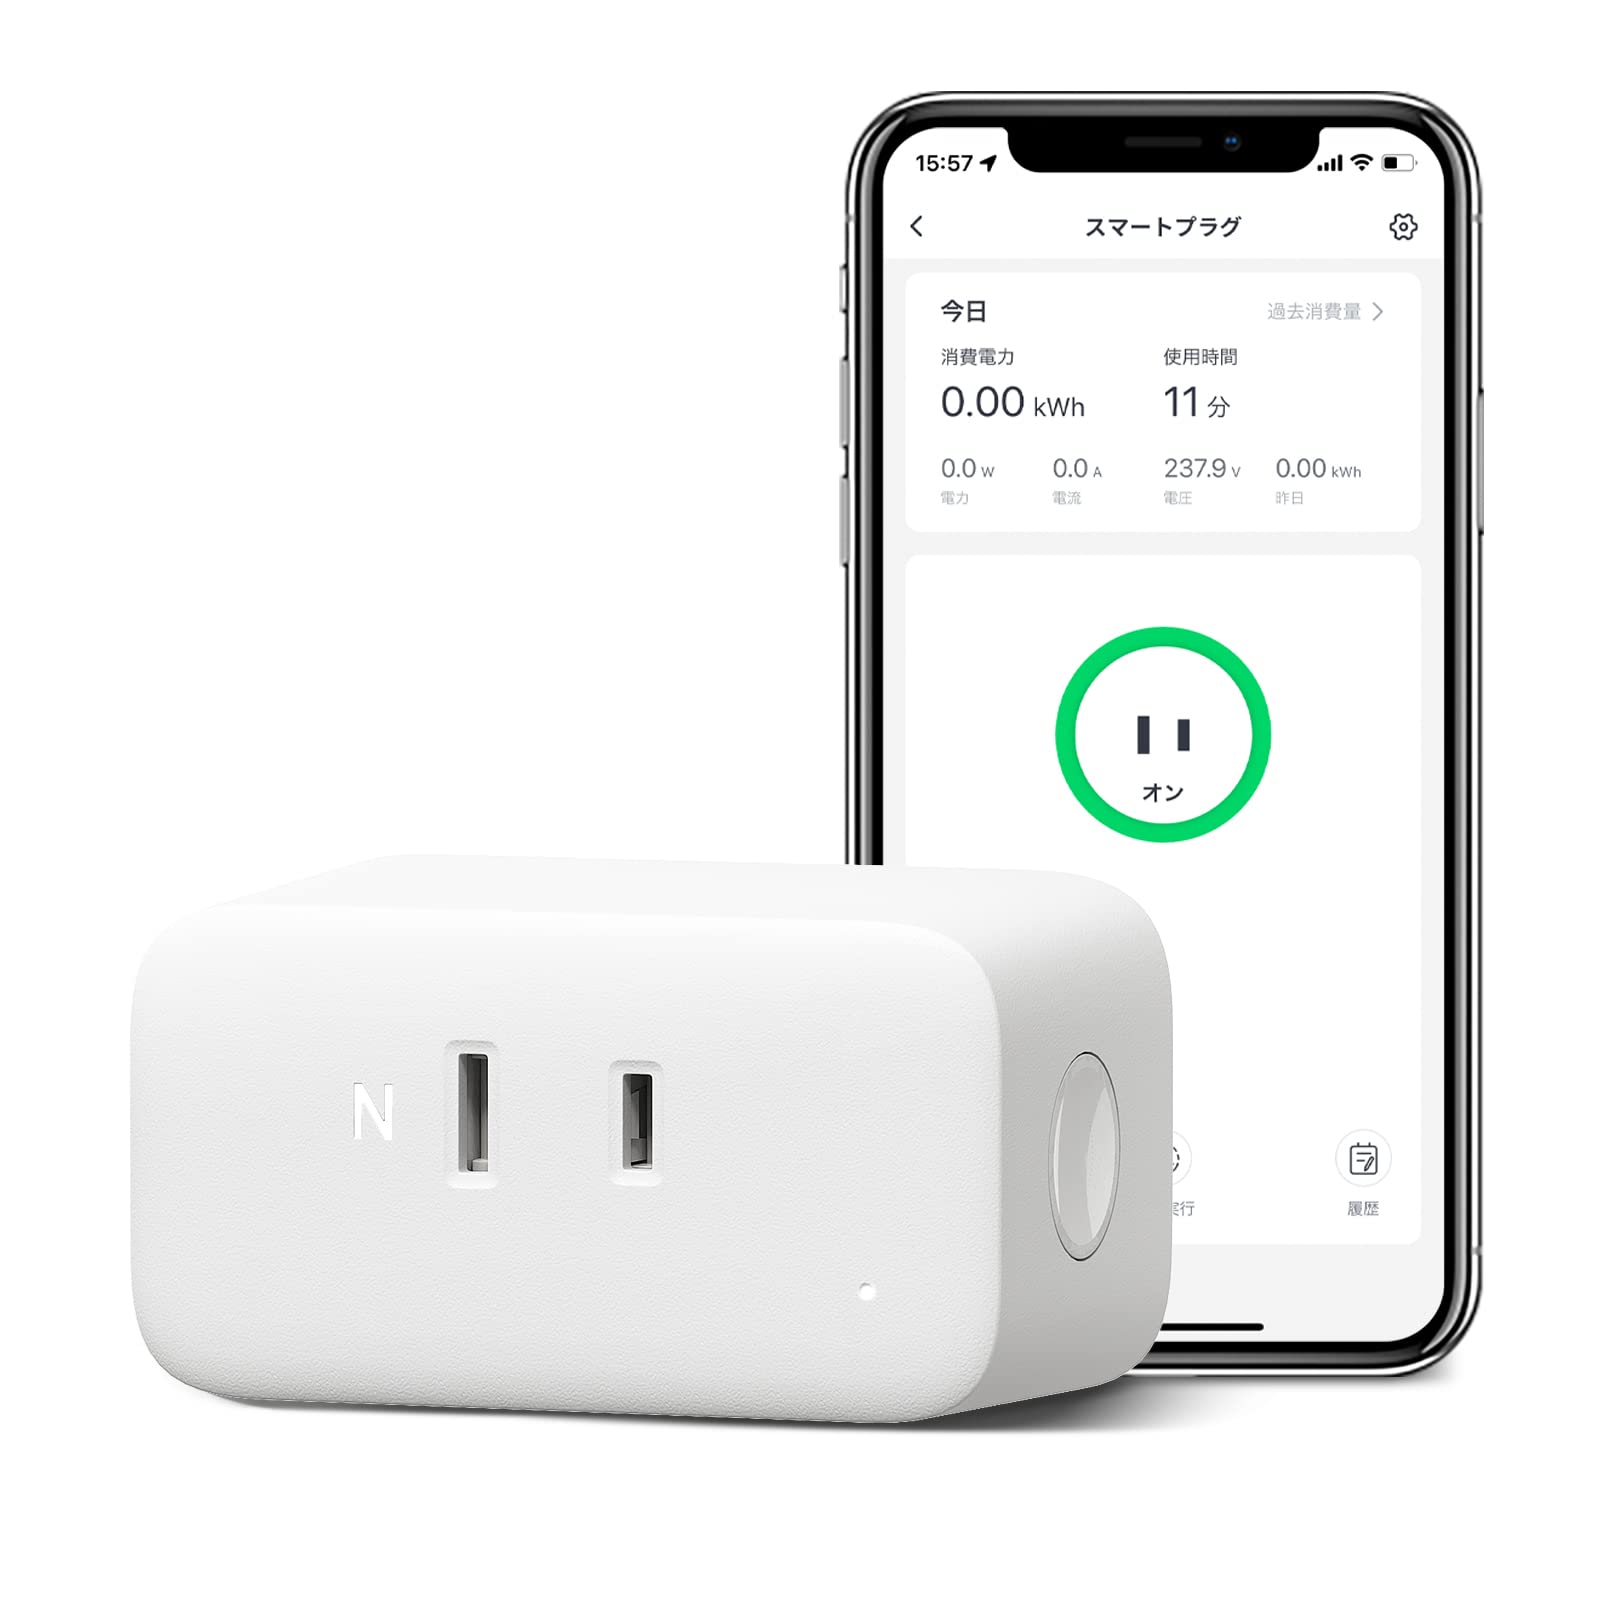 Buy SwitchBot Mini Smart Plug, Timer, Outlet, Bluetooth & Wi-Fi, Remote Control, Power Usage Statistics, Voice Smart Home, Compatible with Alexa, Google IFTTT, Siri